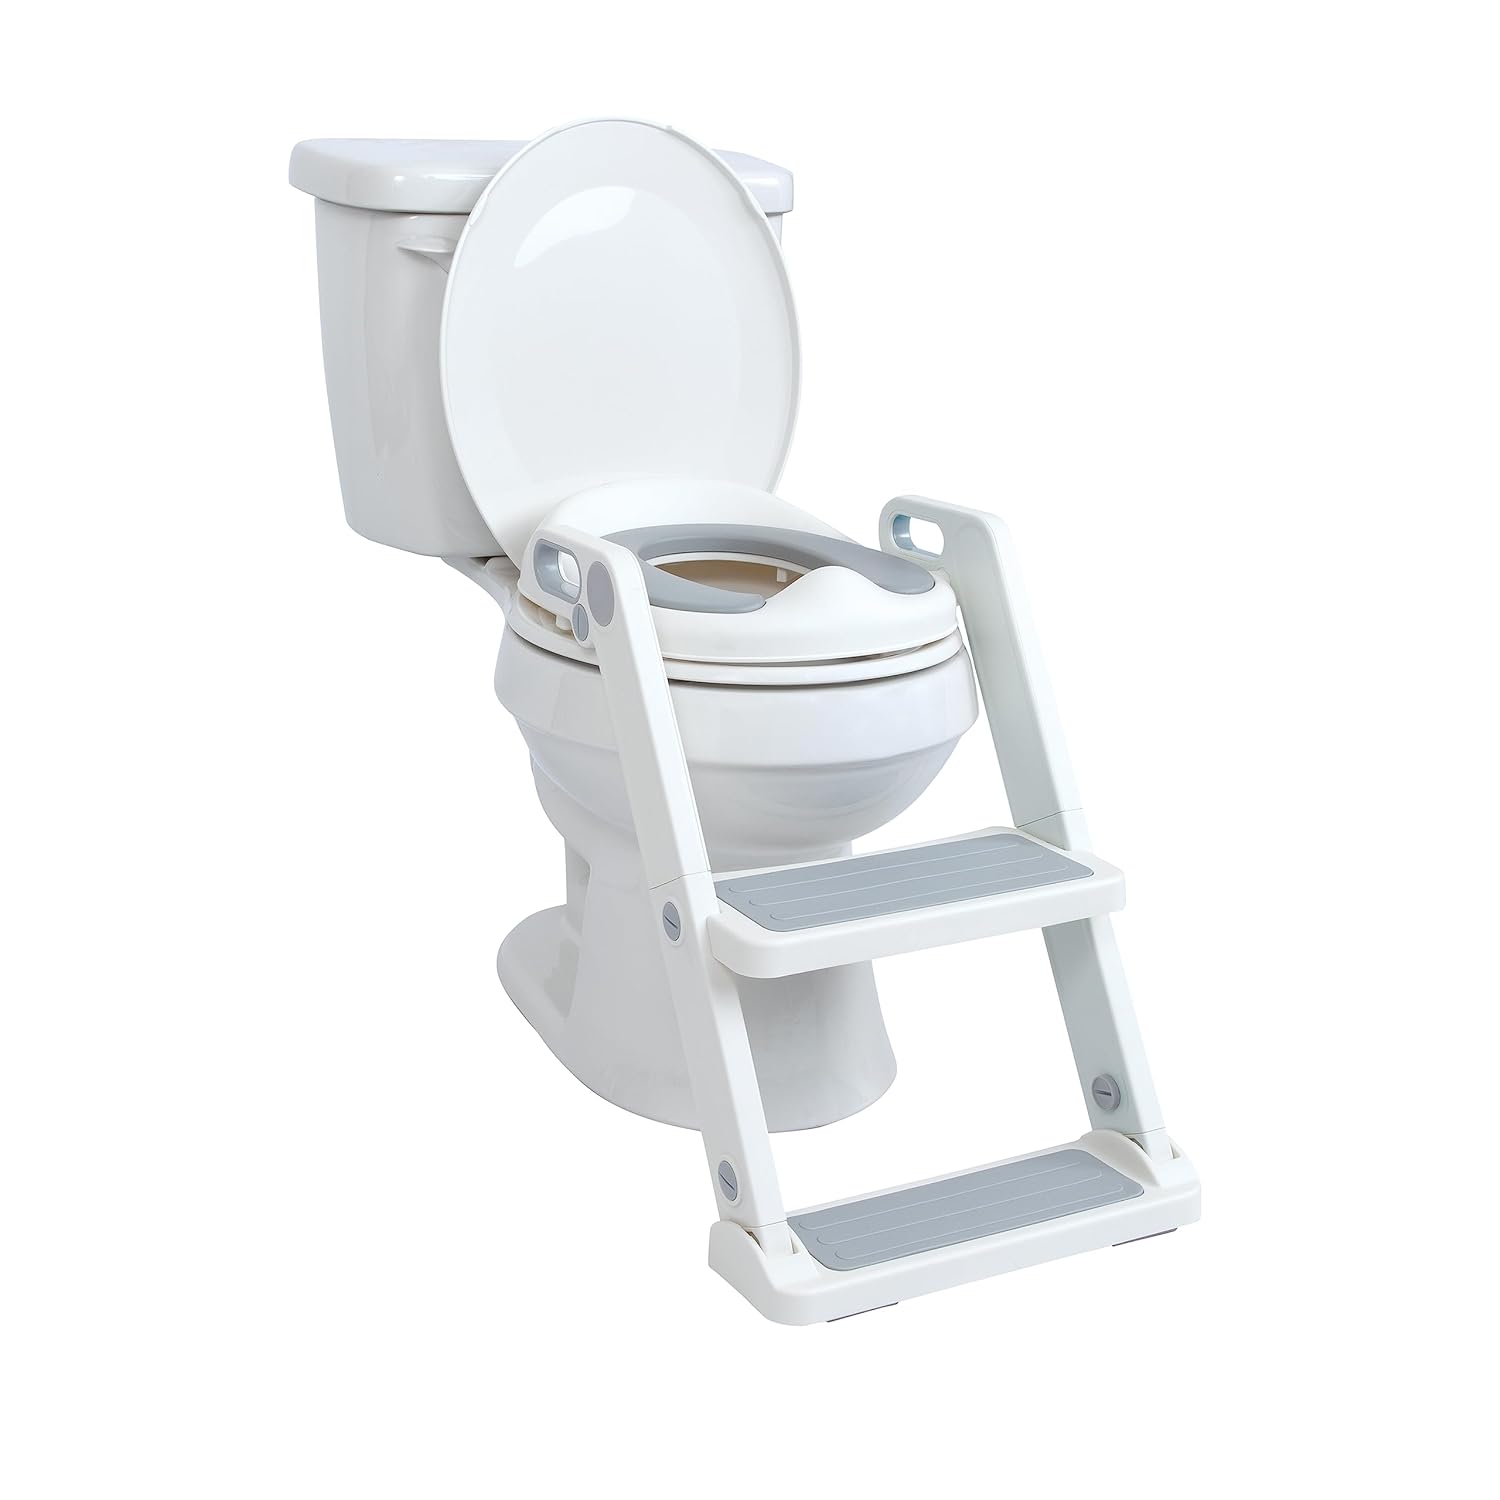 POTTY SEAT TOPPER WITH LADDER